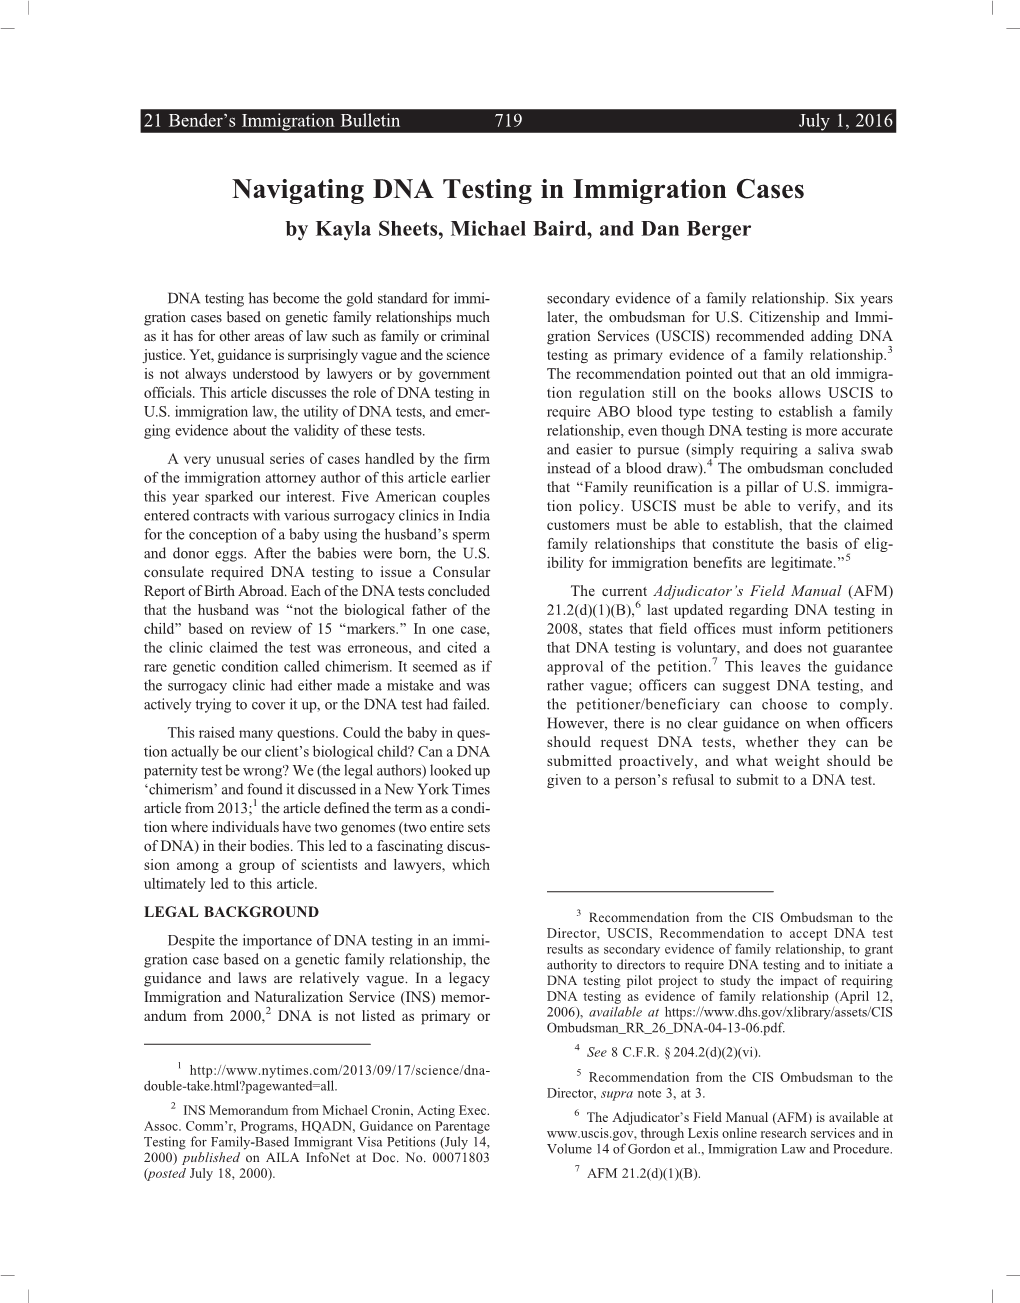 Navigating DNA Testing in Immigration Cases by Kayla Sheets, Michael Baird, and Dan Berger